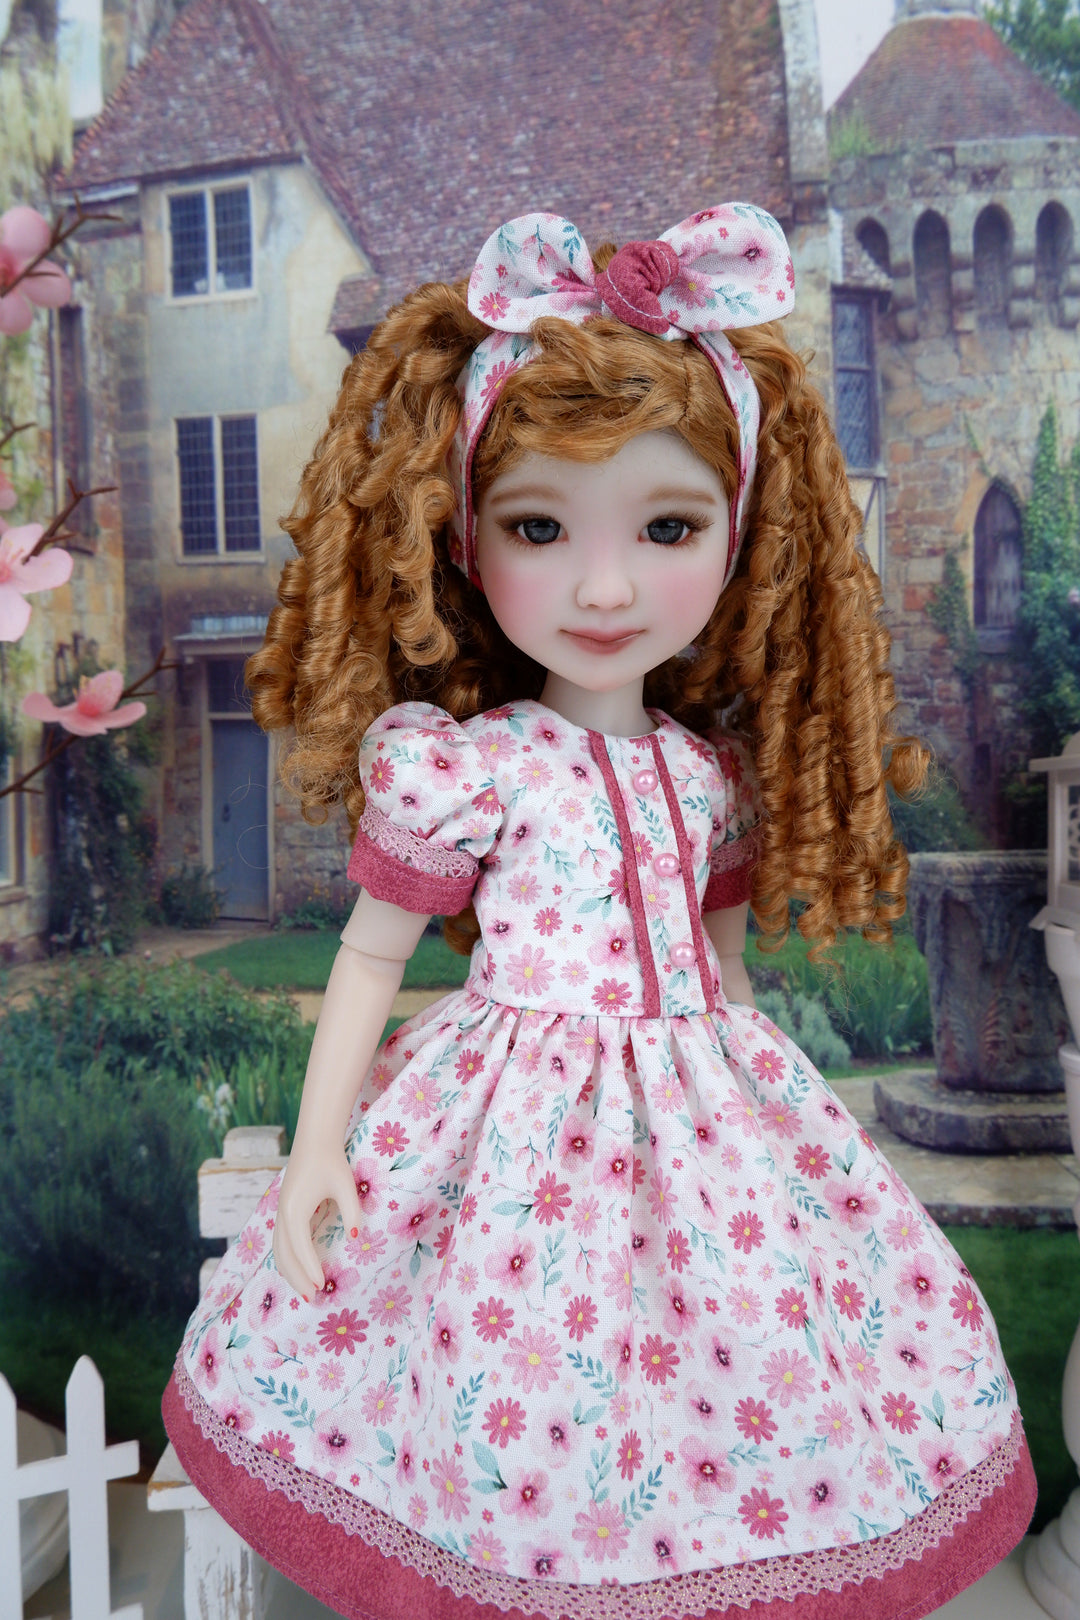 Daisy Petals - dress and shoes for Ruby Red Fashion Friends doll